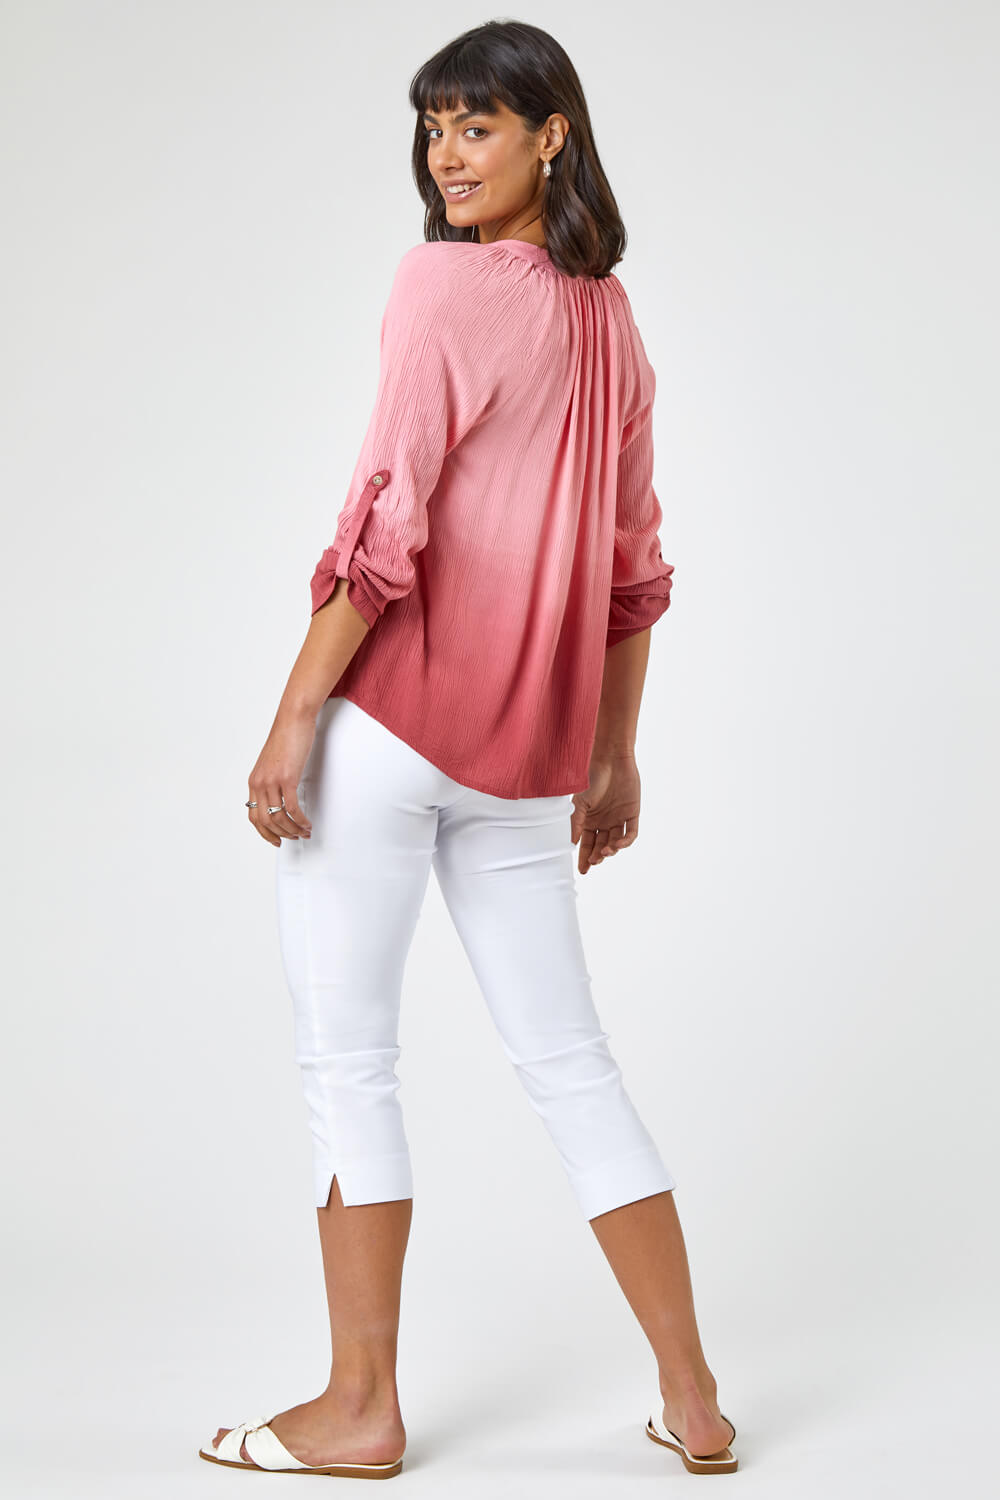 PINK Sequin Embellished Ombre Blouse, Image 2 of 5